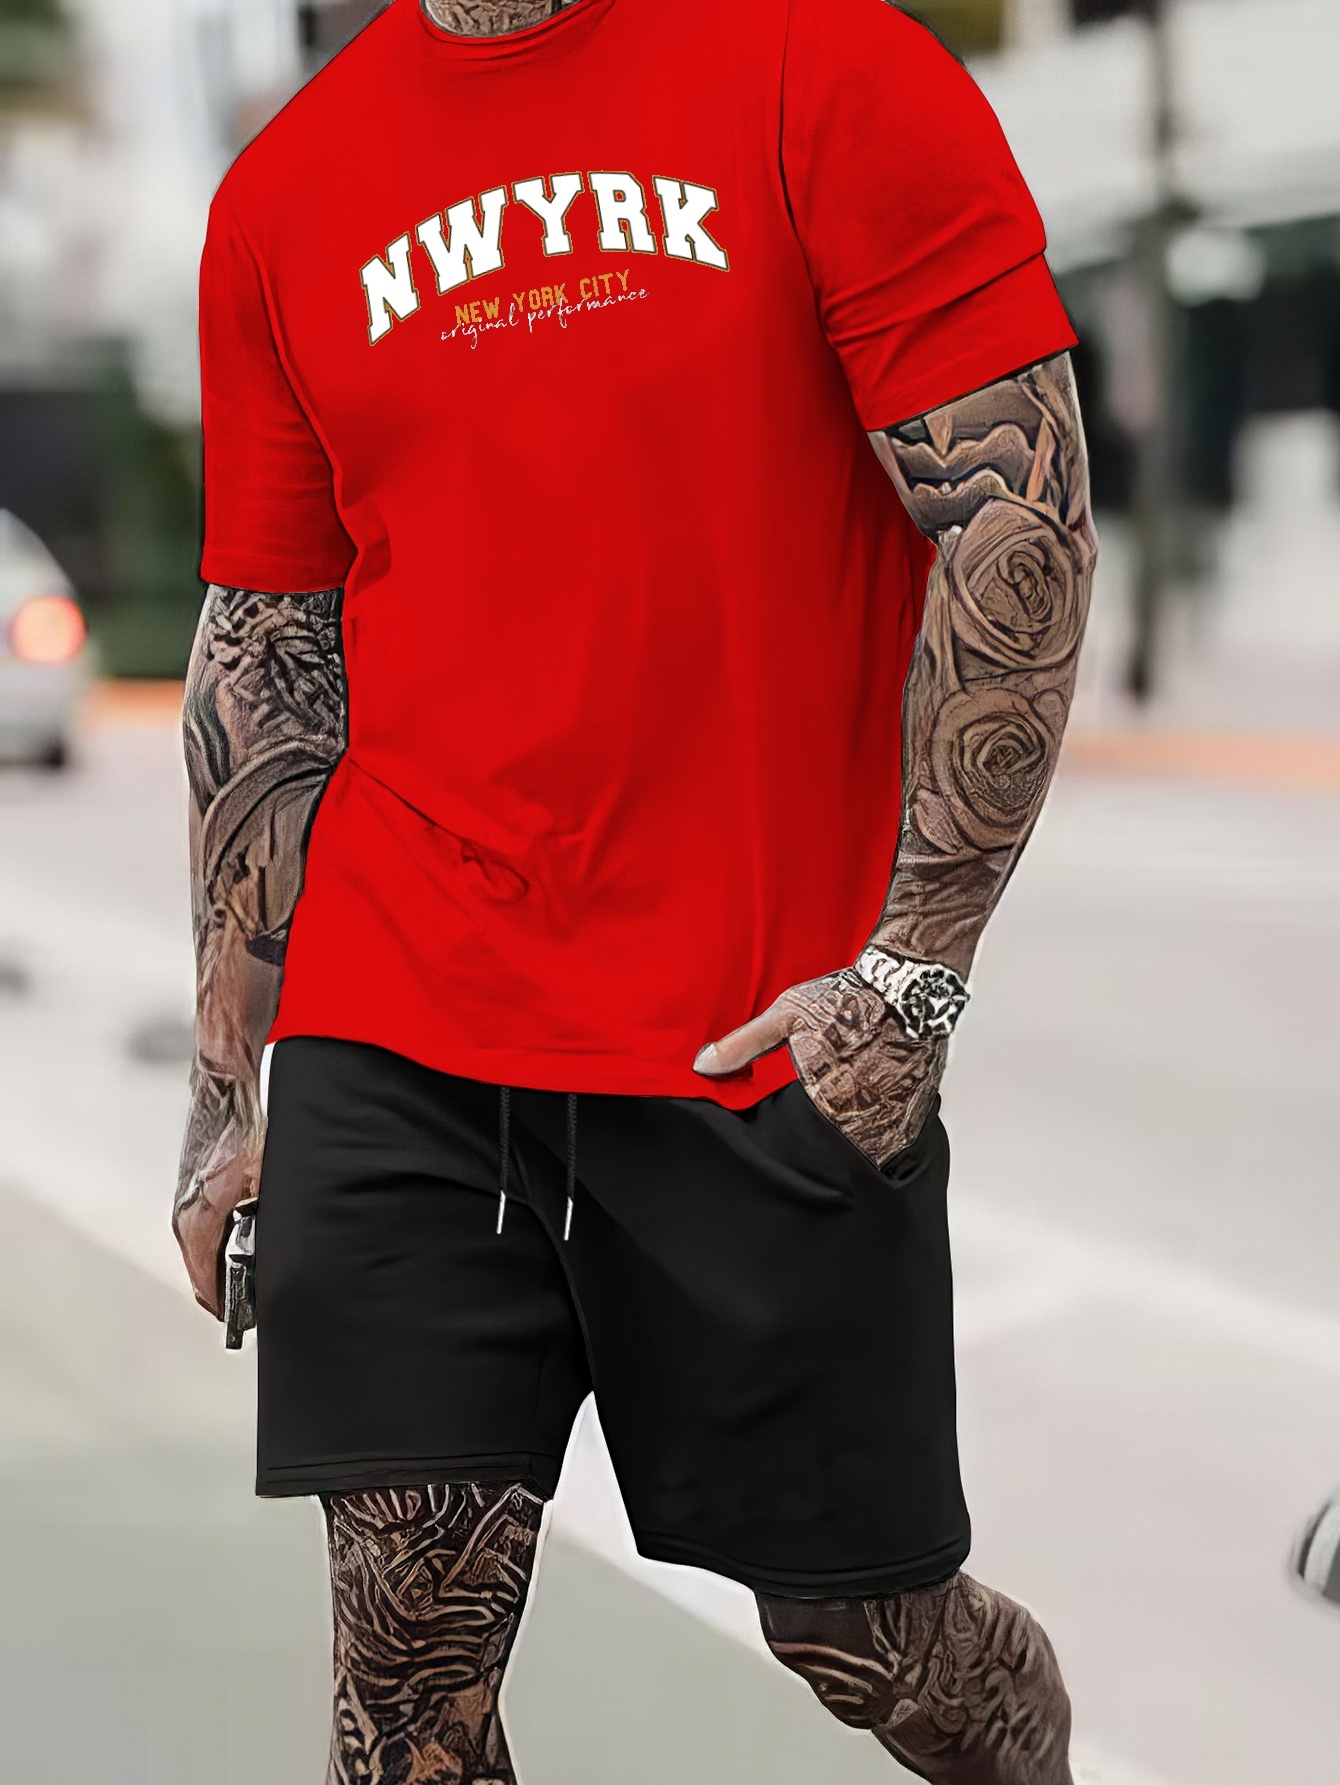 New York Print Street Style Mens 2pcs Outfits Trendy T Shirt And